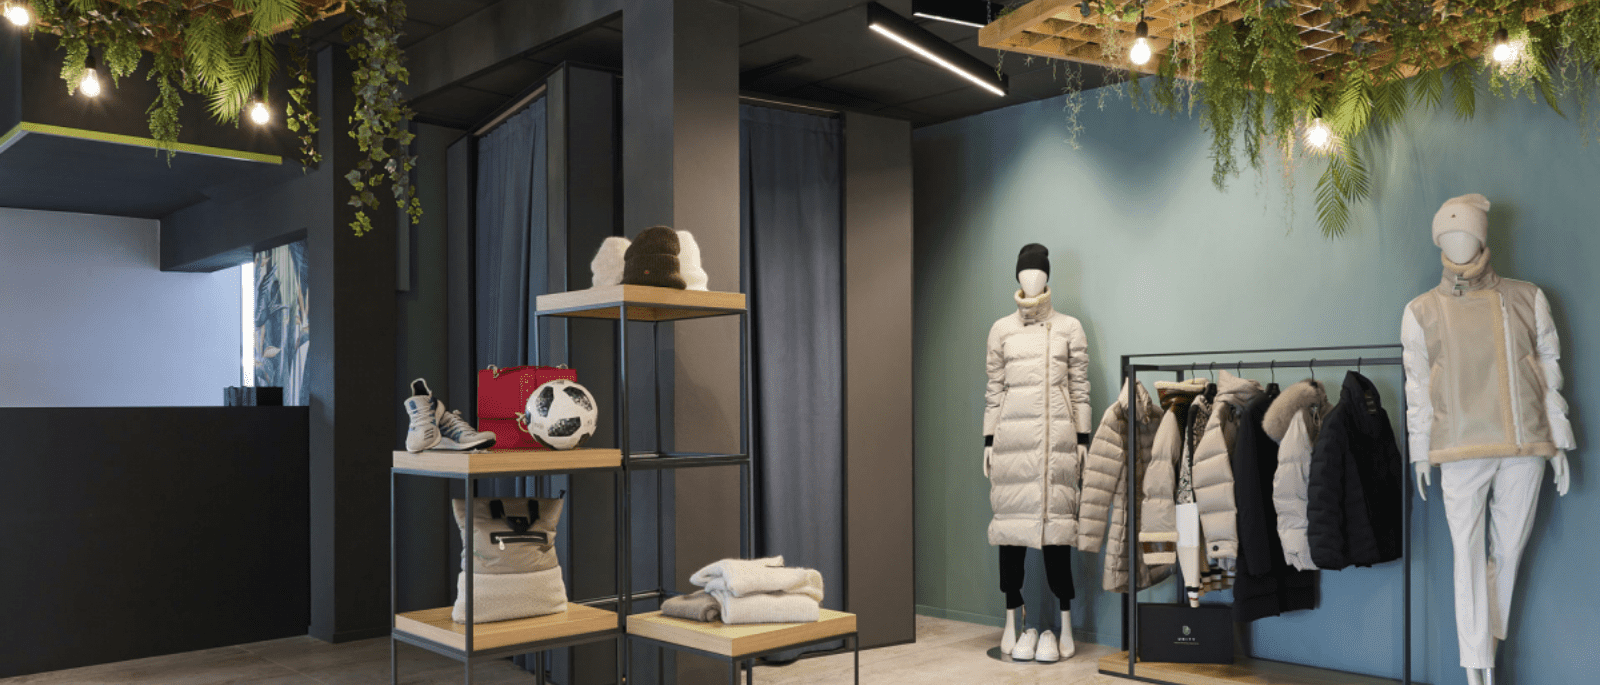 We participated at the UNITY projetc, organised by Temera, we applied our rfid shiedling solution on walls of the fitting room of the concept store